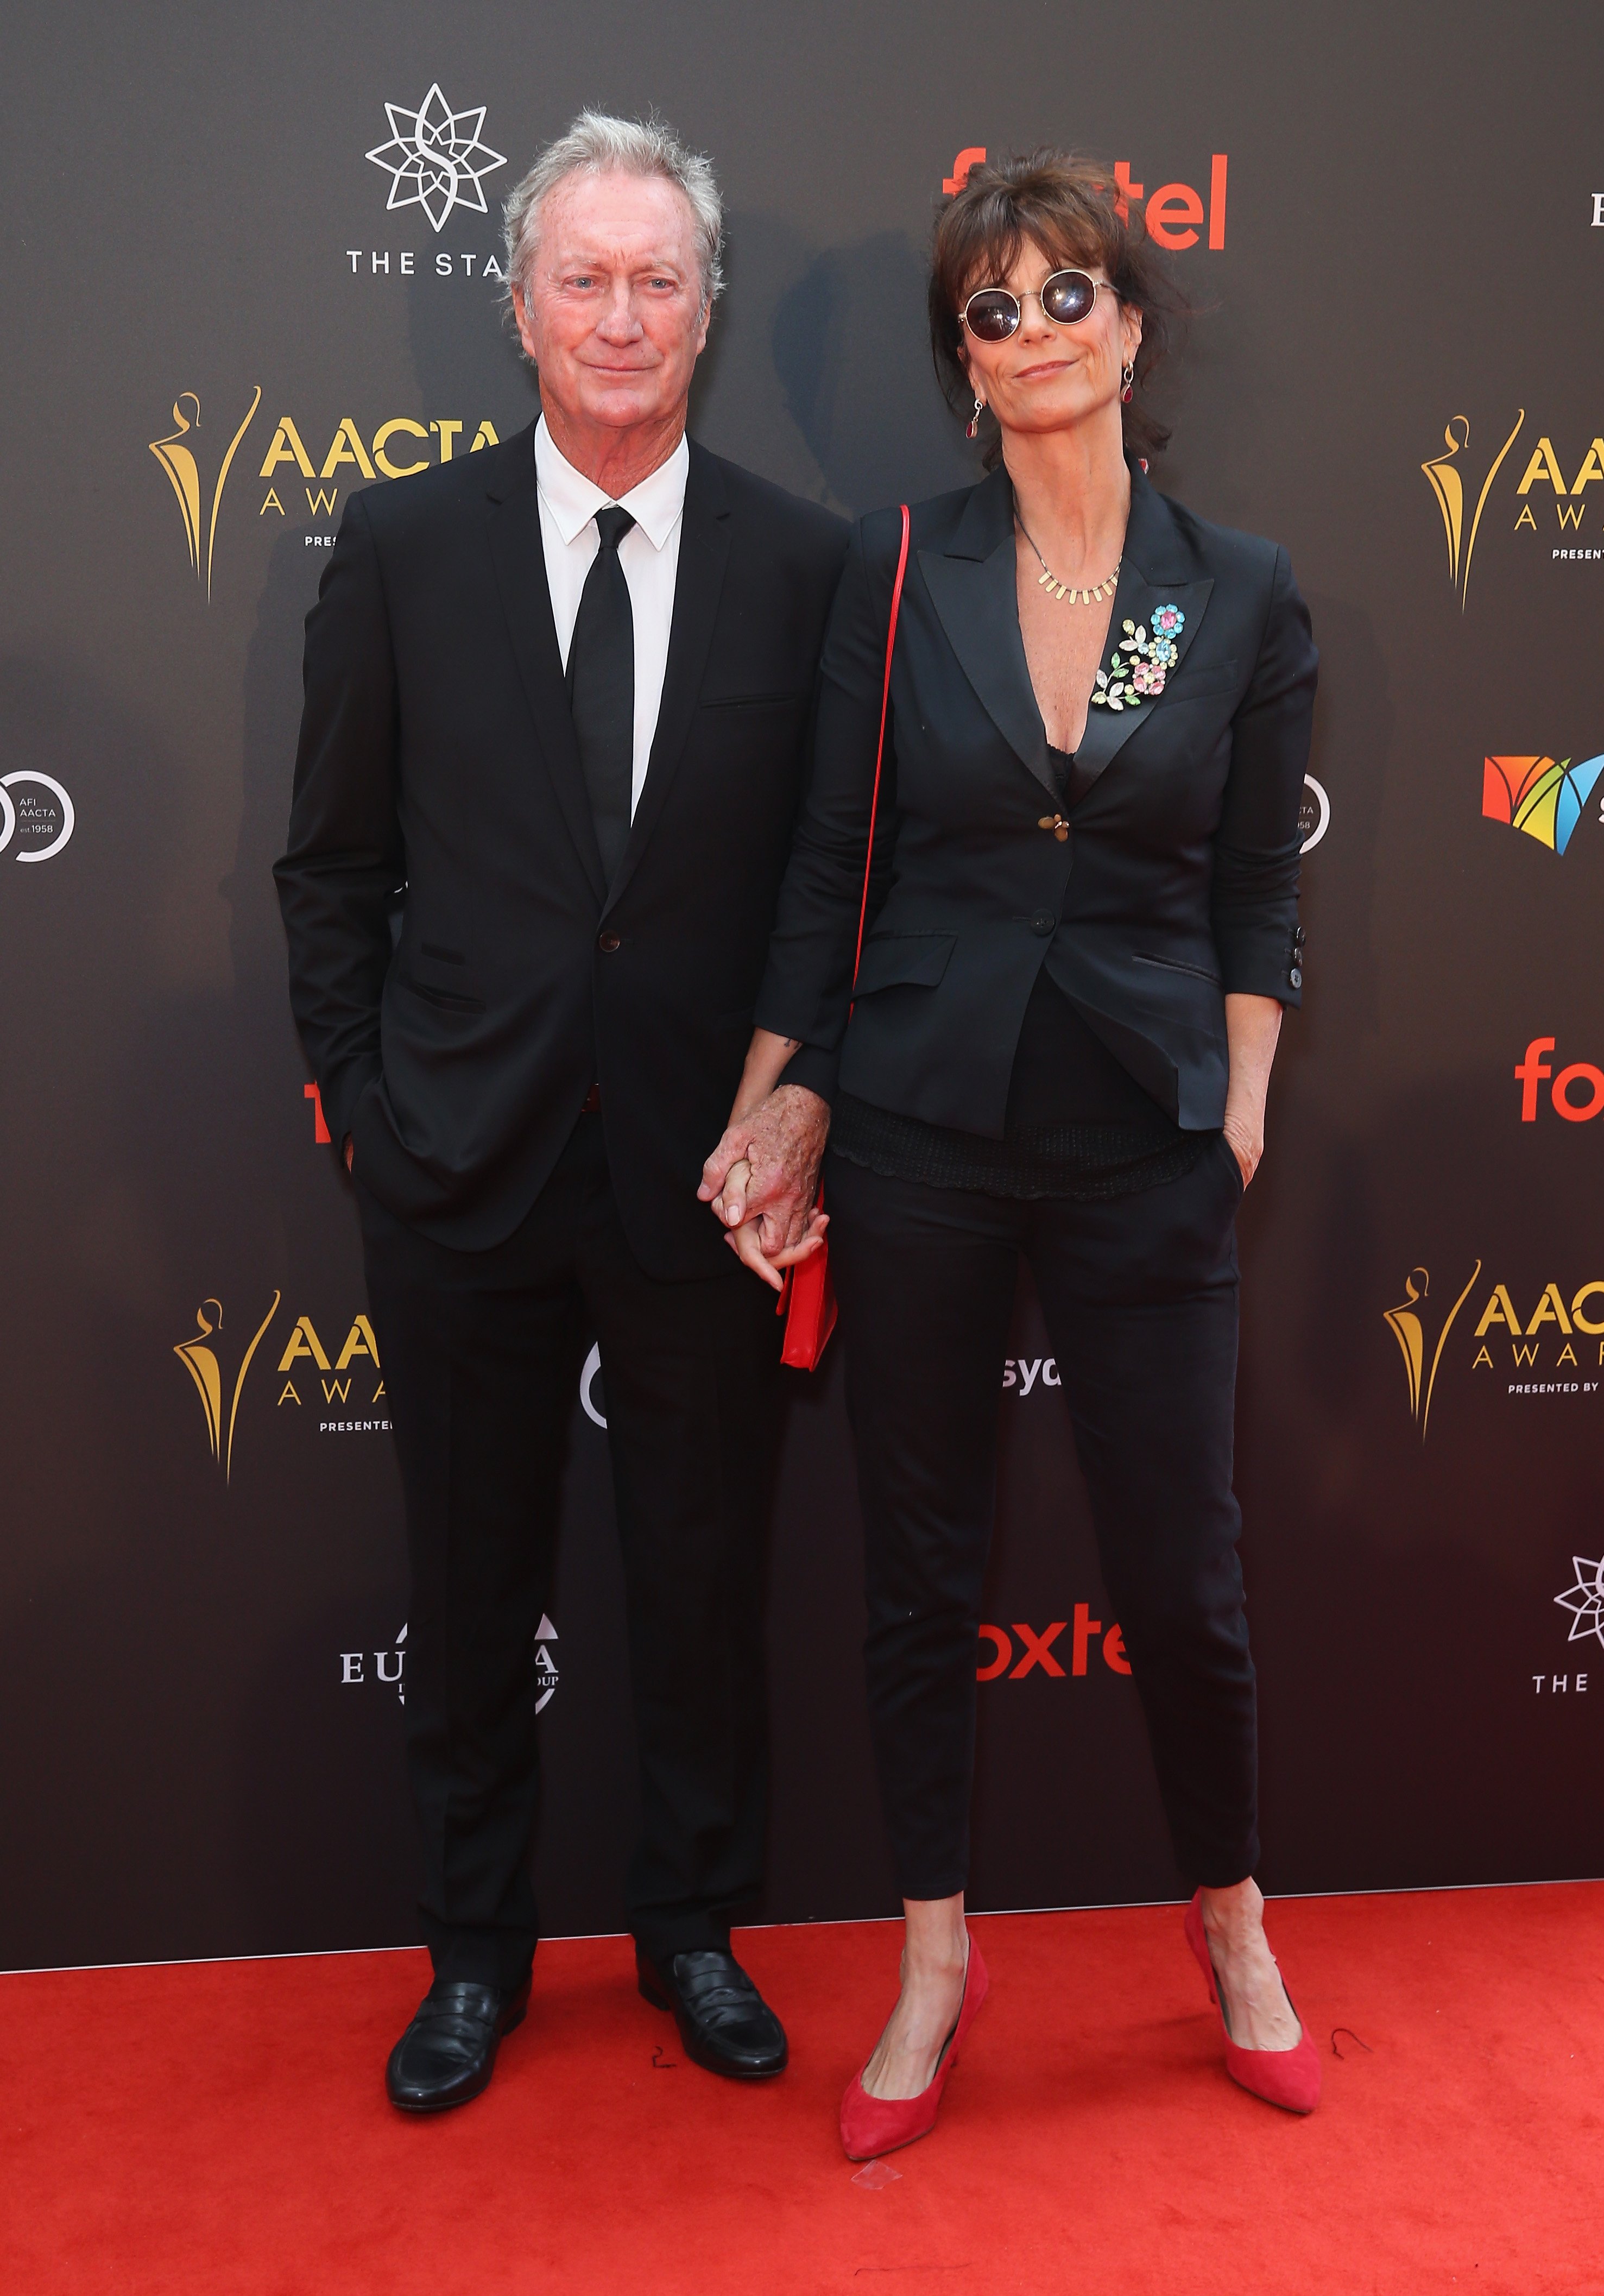 Bryan Brown and Rachel Ward at the 2018 AACTA Awards Presented by Foxtel at The Star on December 5, 2018 in Sydney, Australia. | Source: Getty Images